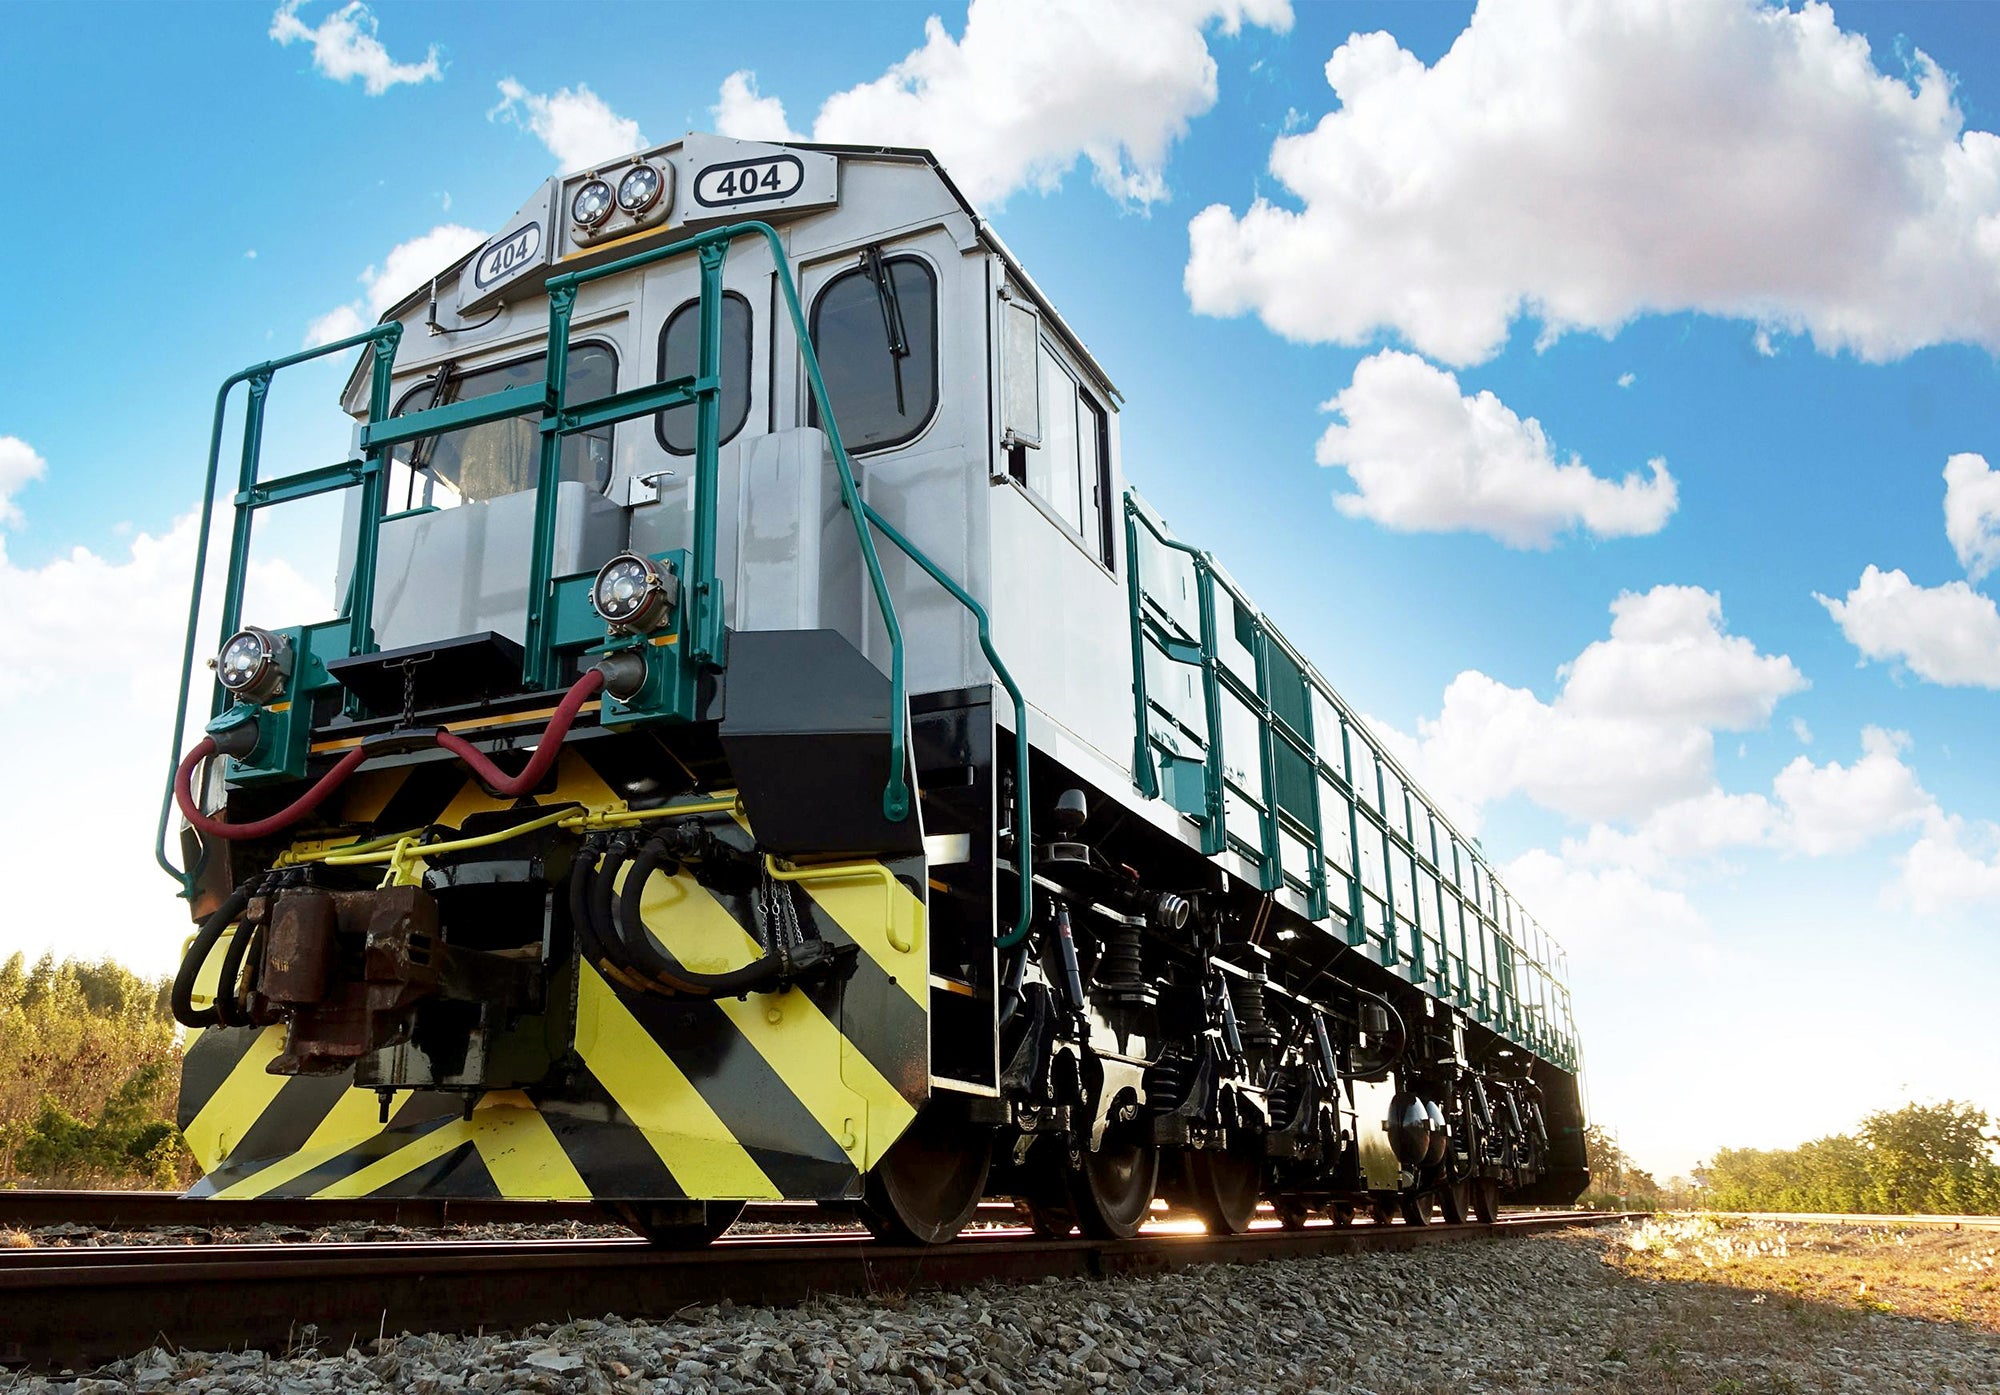 A low angle photo of a train engine without cars attached.